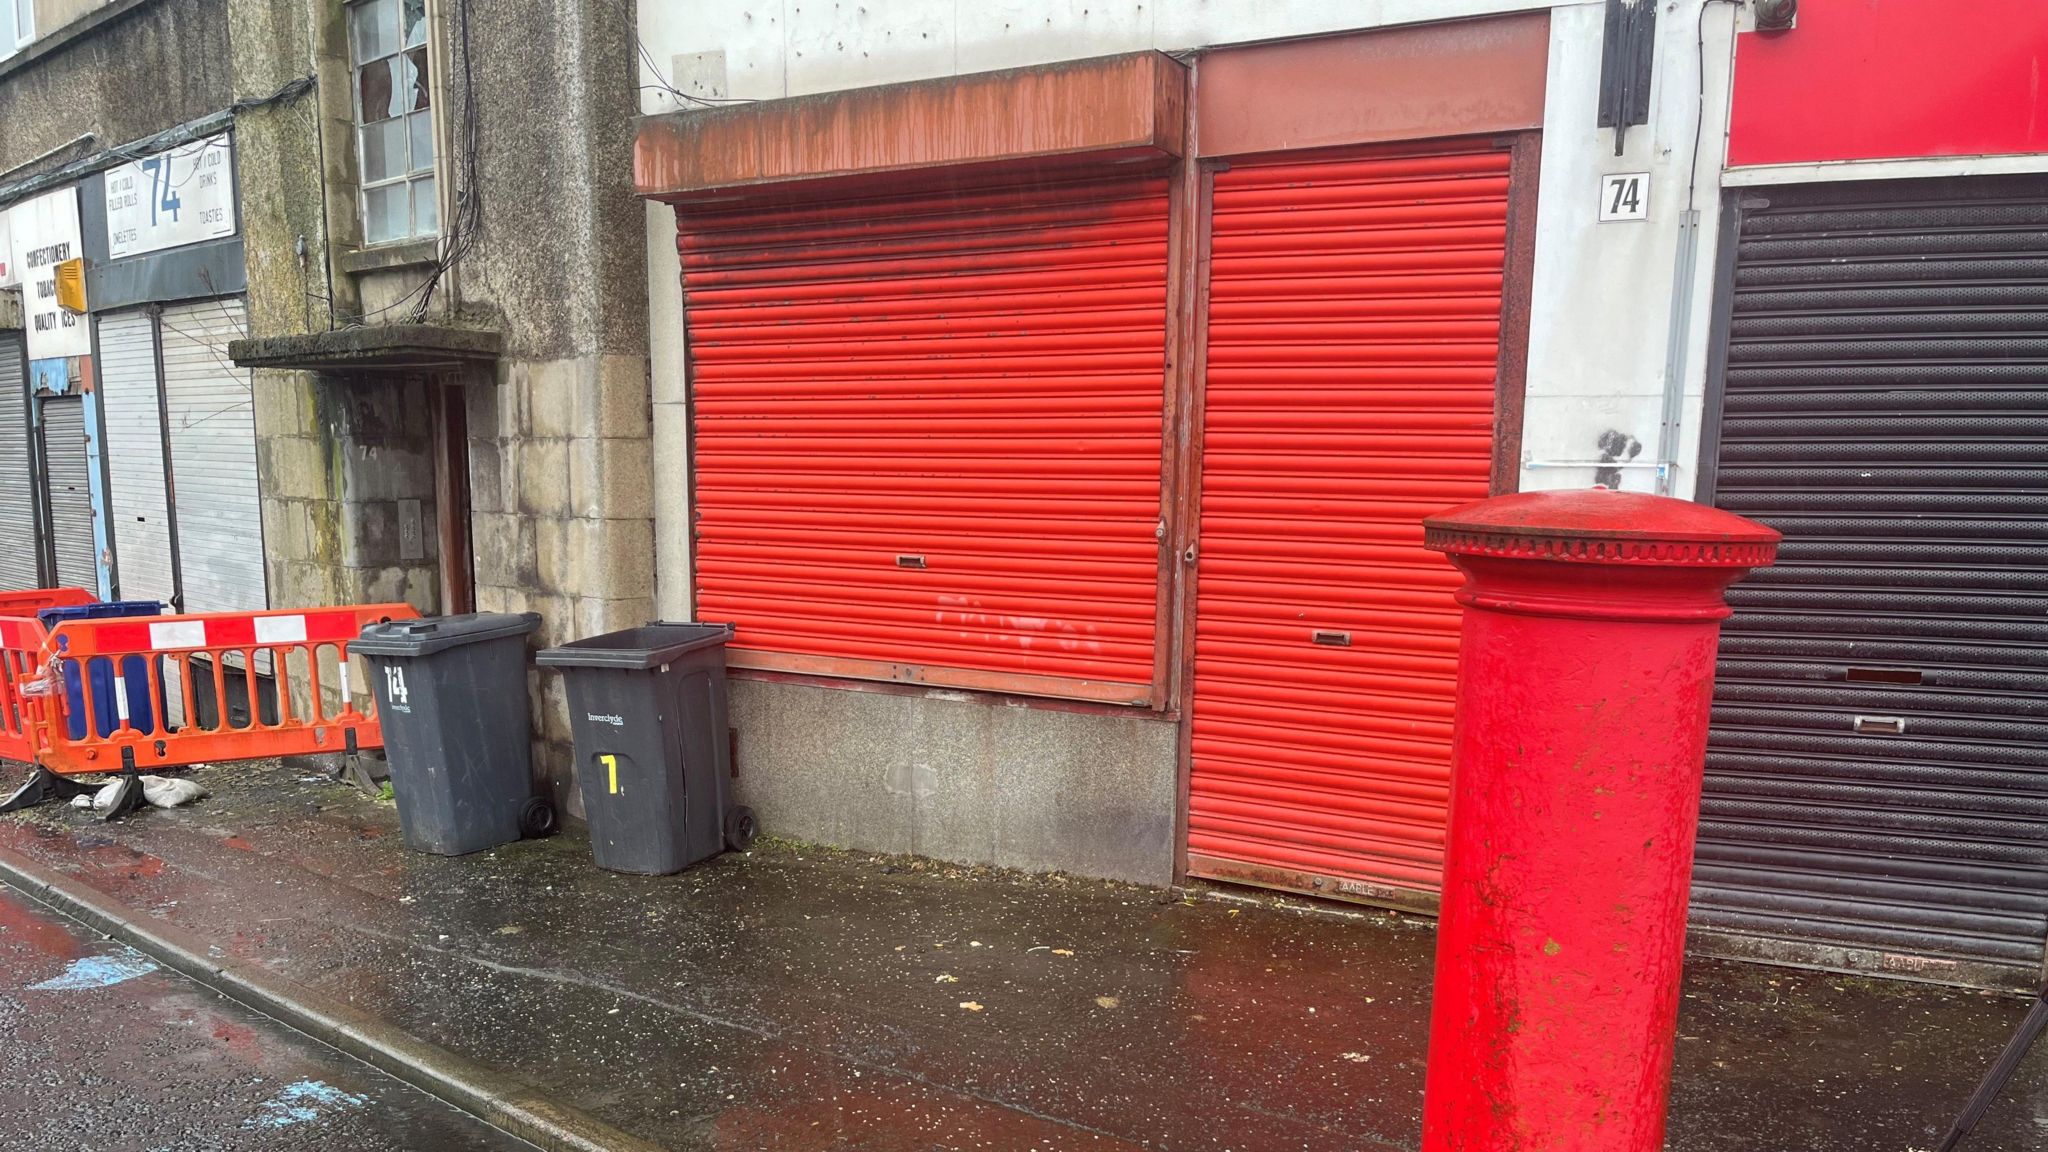 The former Belville Street Post Office  - a small shop with red shutters pulled down